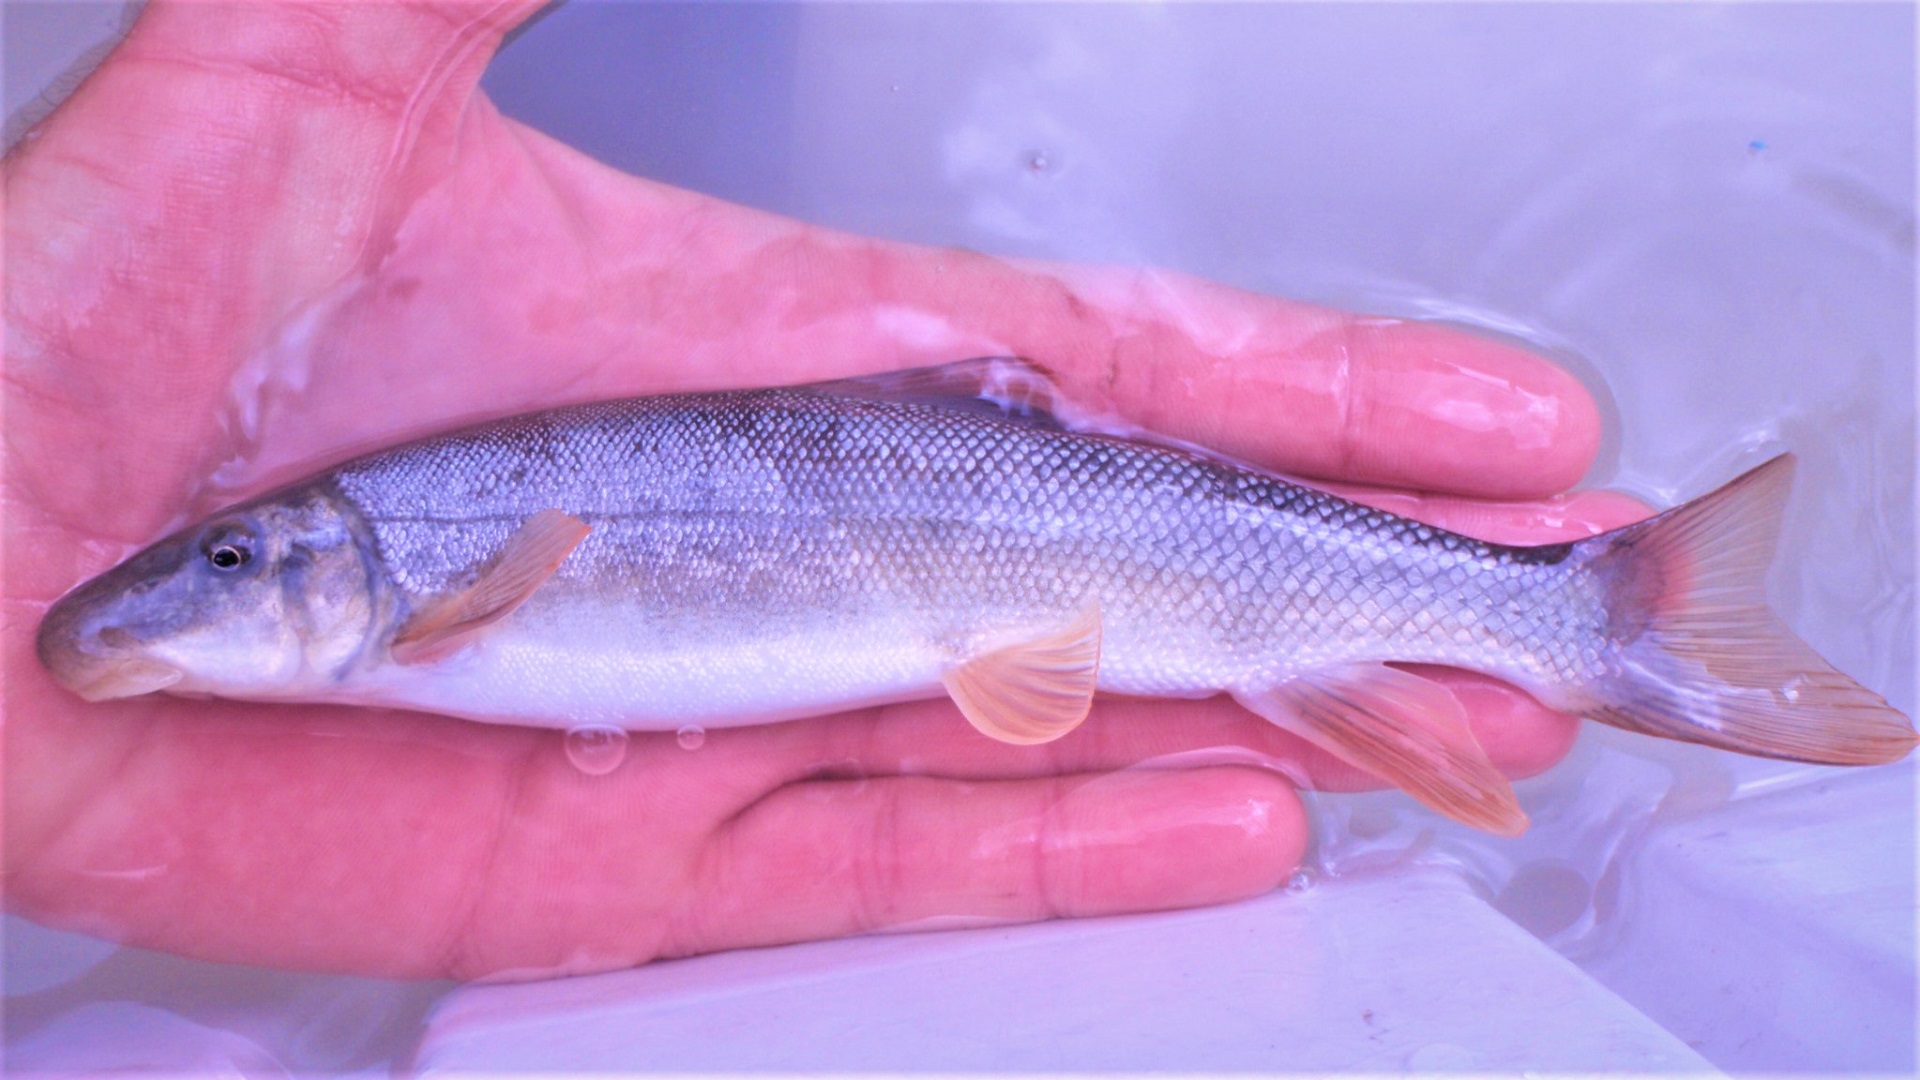 A thin silver fish with a blunt nose lies in a person's hand